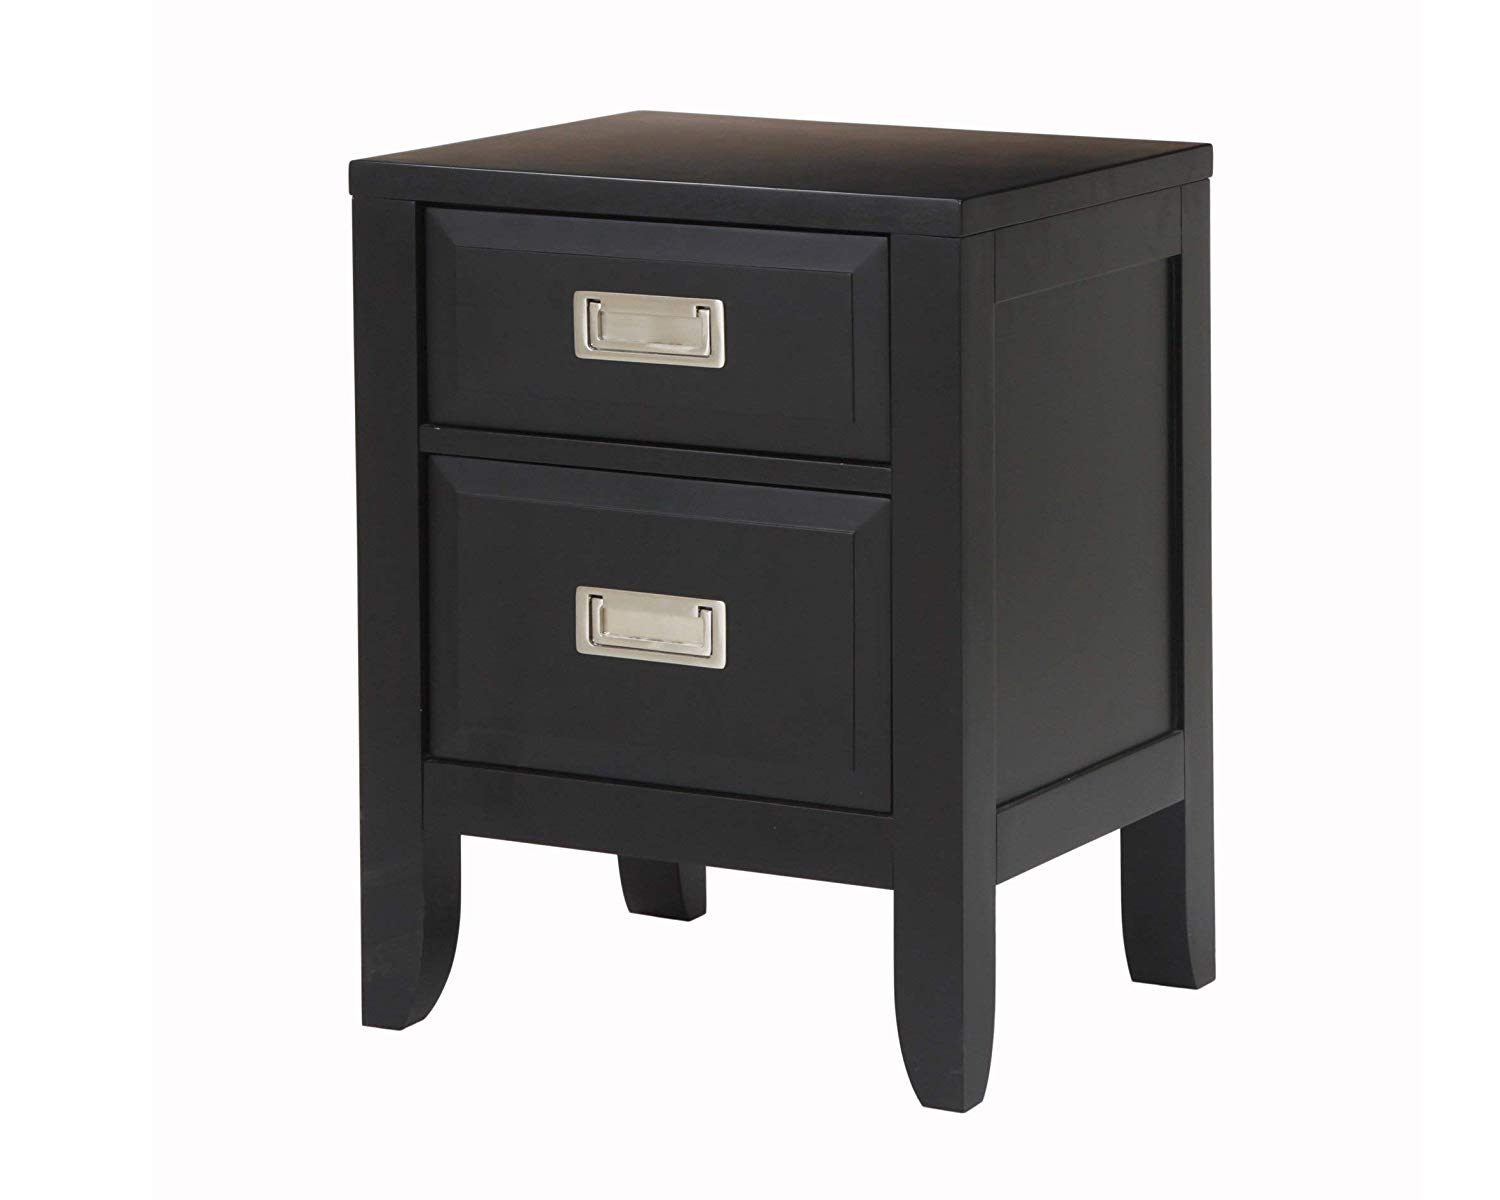 home styles prescott night stand black kitchen dining timmy nightstand accent table square coffee with drawers bedside lamps usb oval acrylic battery lamp round wicker end glass